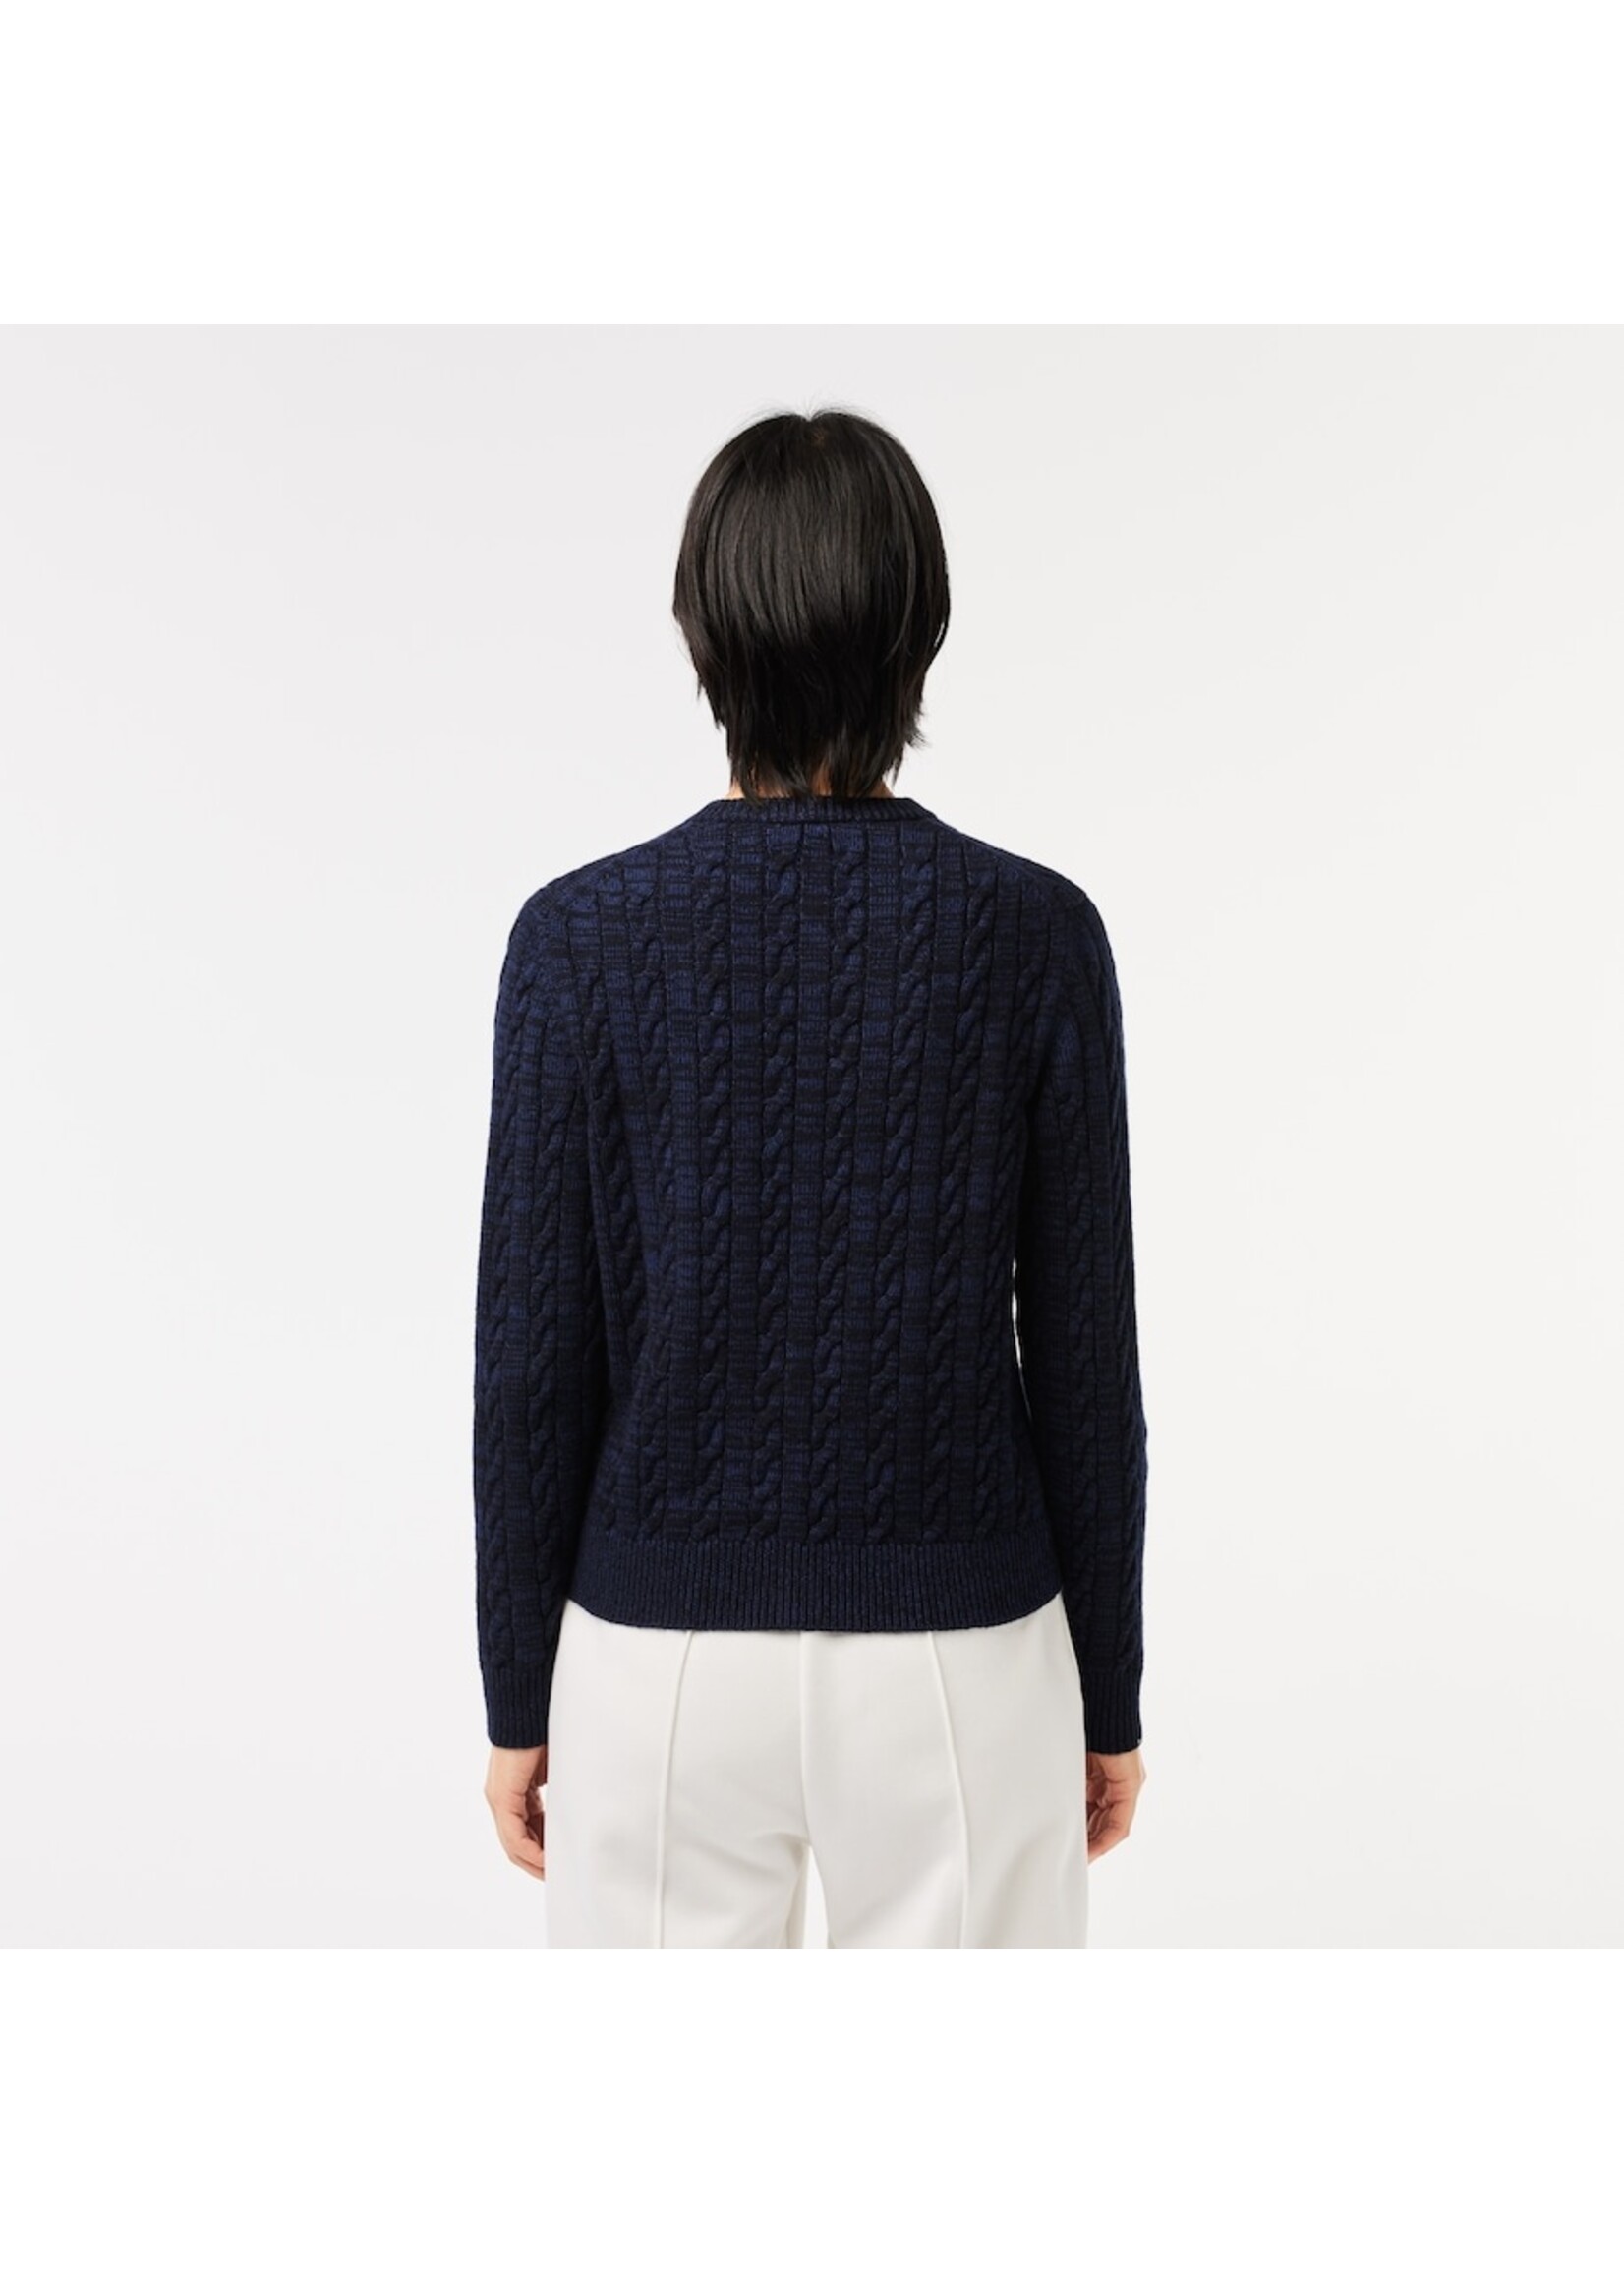 LACOSTE Women's Wool Blend Cable Knit Cardigan